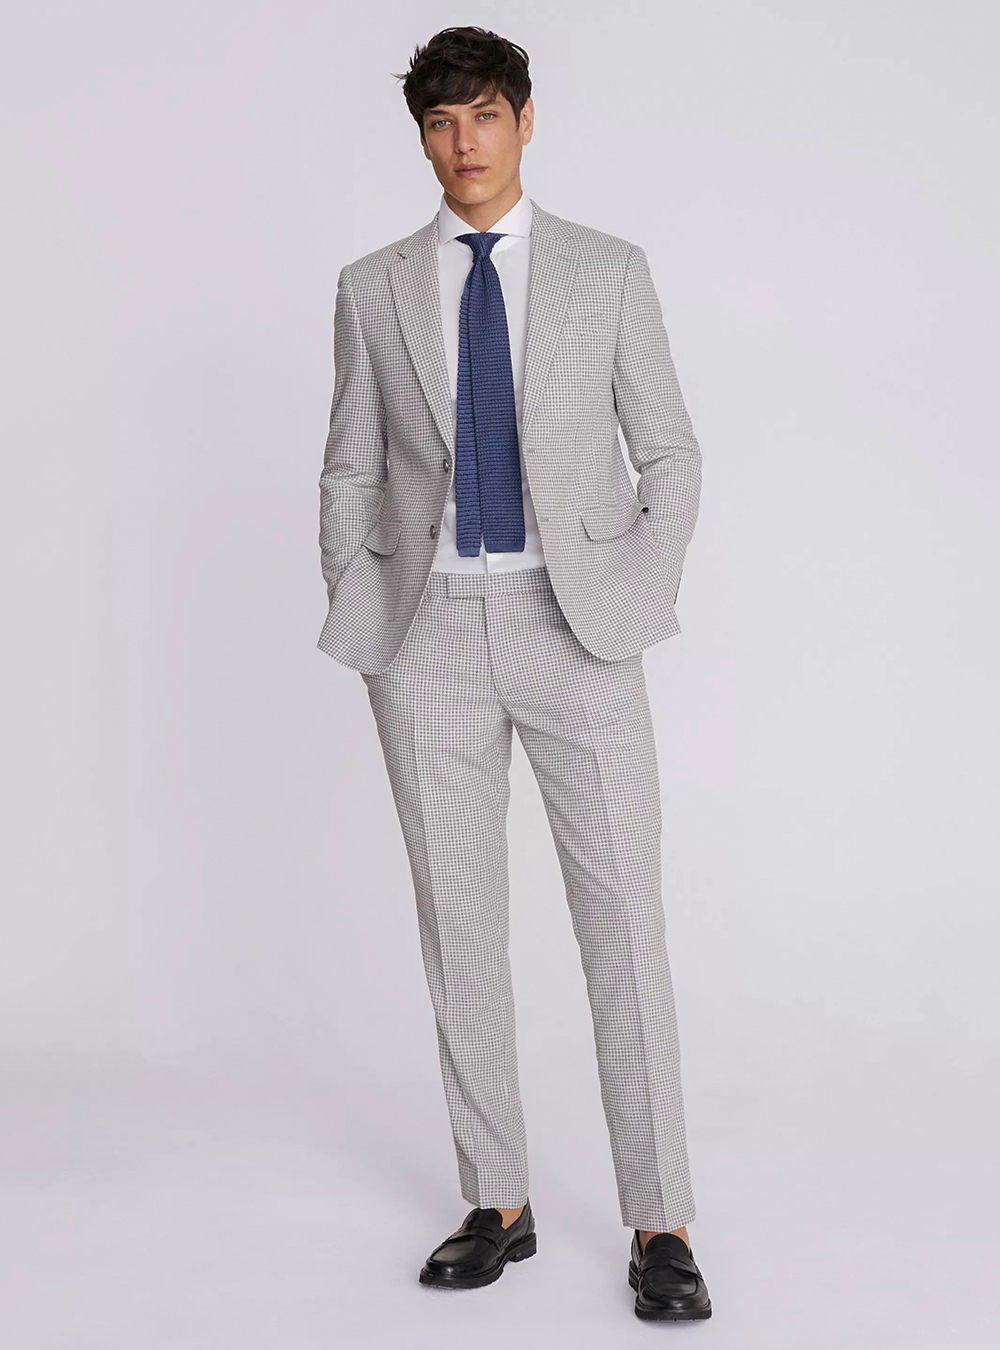 Grey houndstooth suit, white dress shirt, blue tie and black loafers